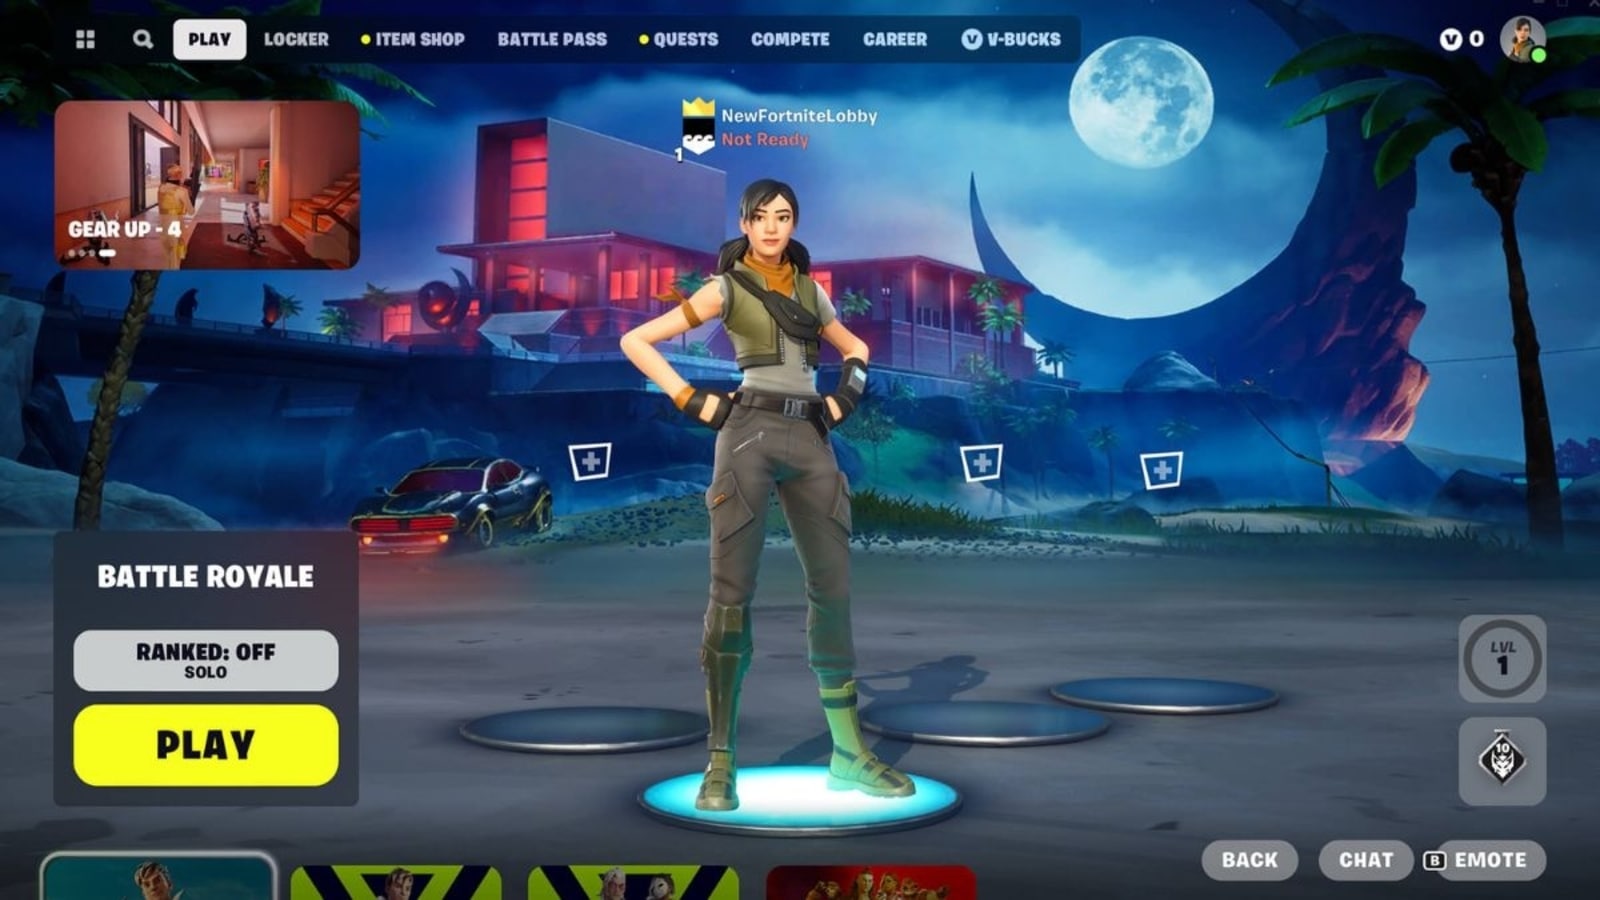 Fortnite may return to the iPhone in 2023